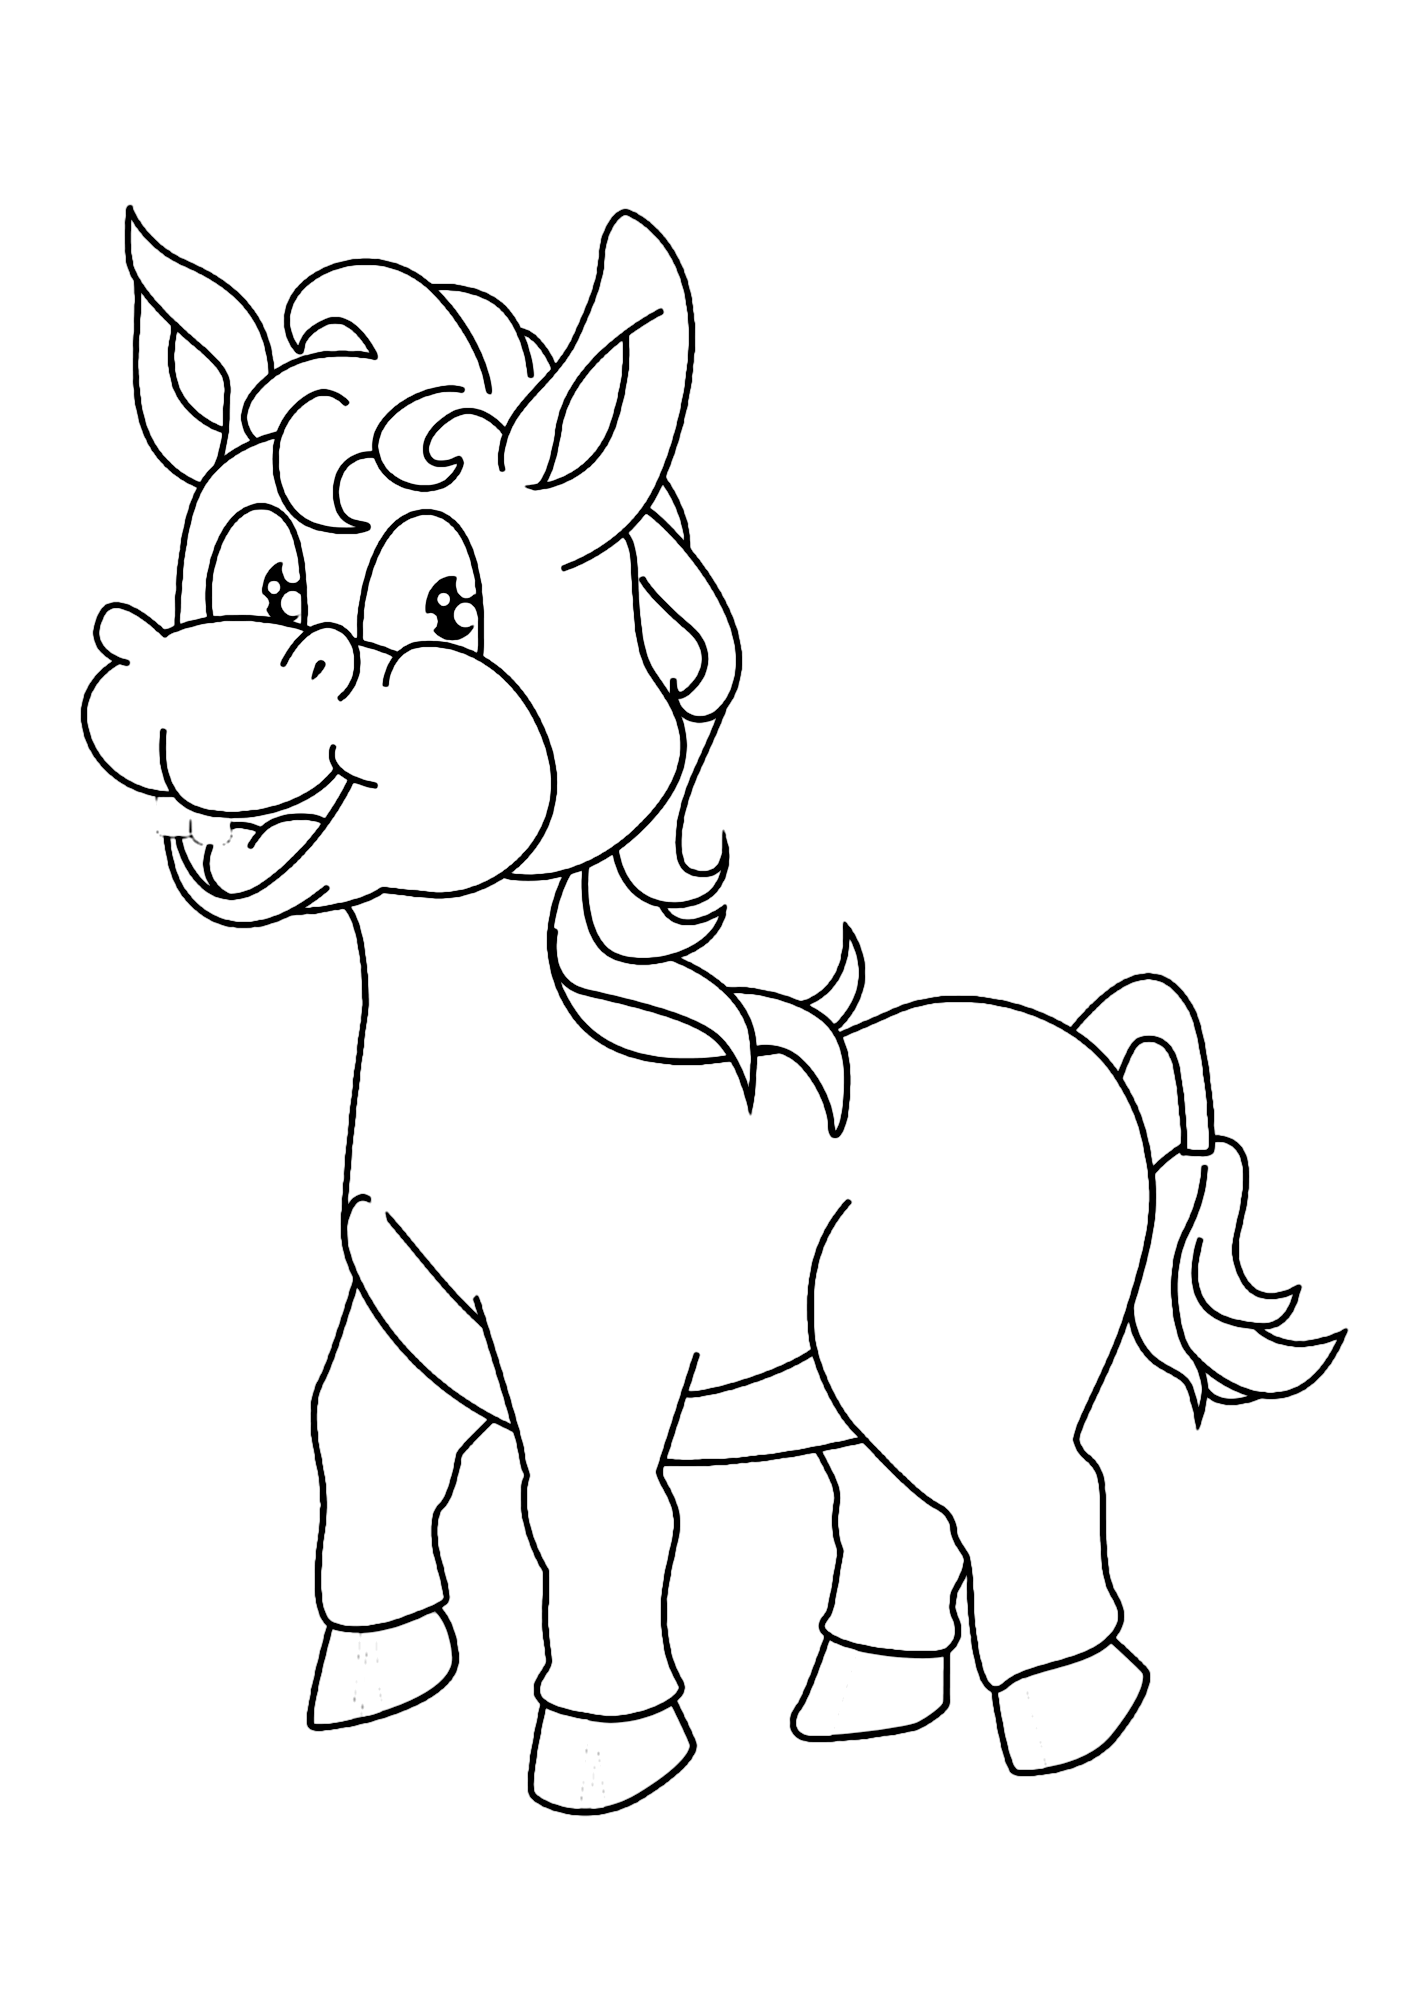 Lovely Donkey Coloring Page